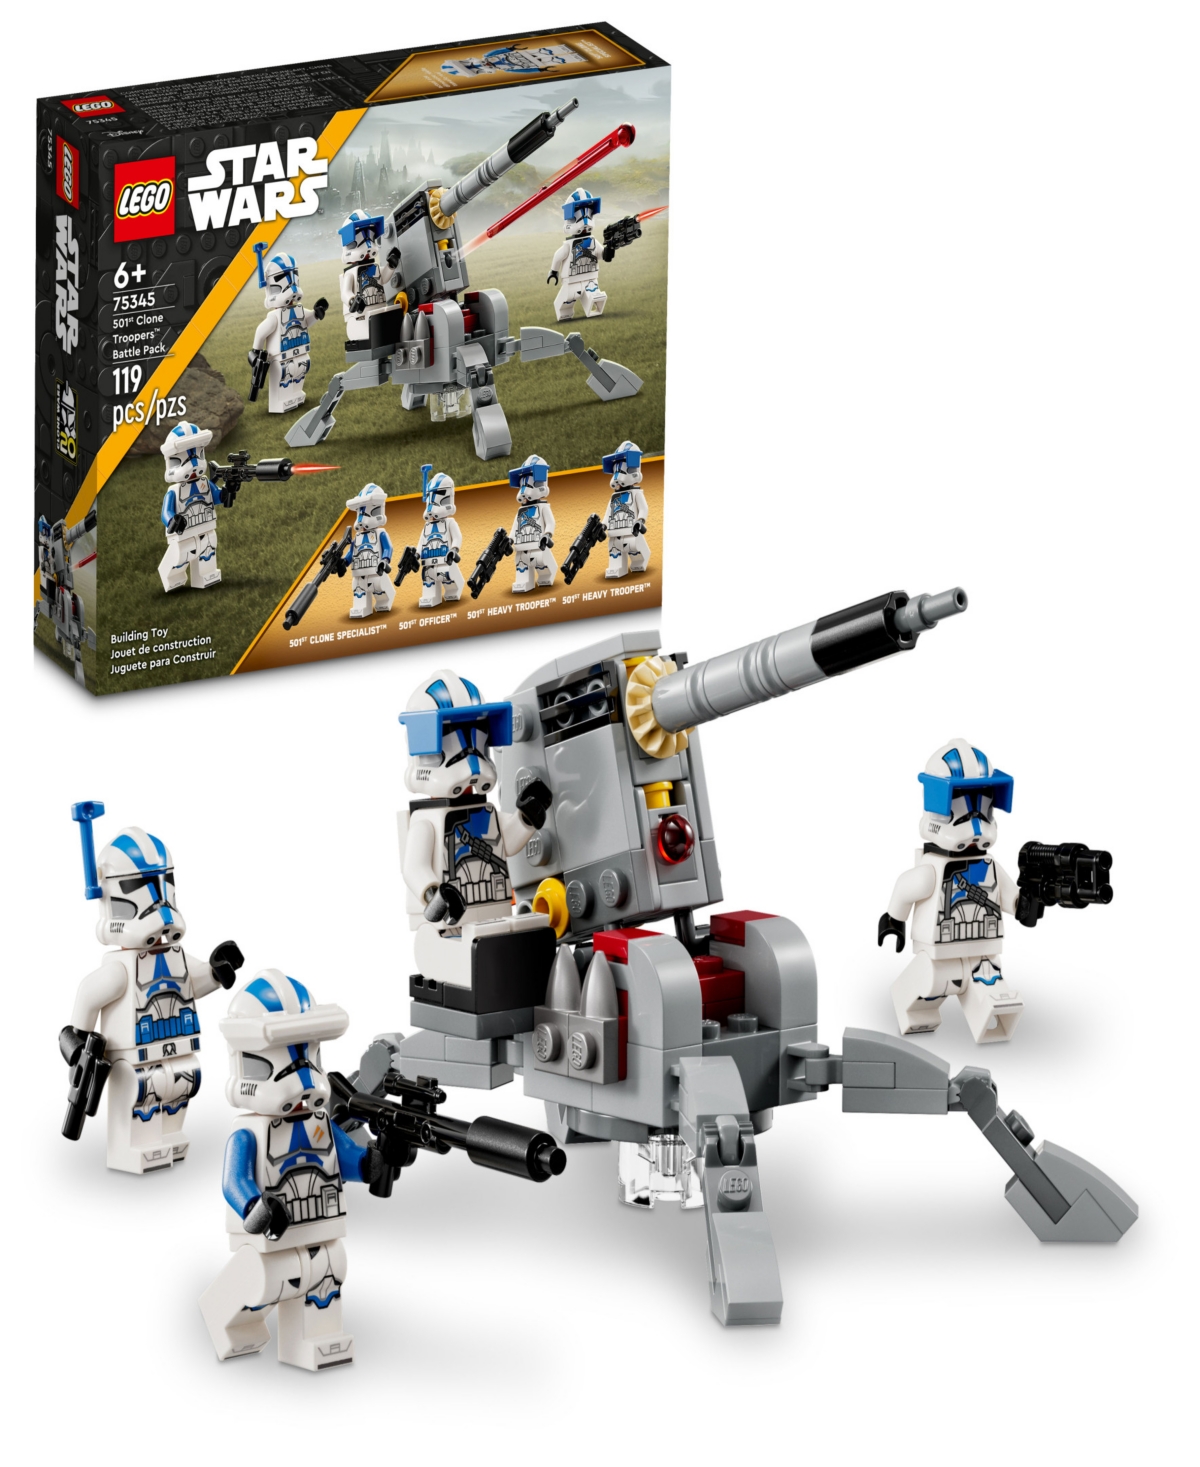 Lego Star Wars 501st Clone Troopers Battle Pack 75345 Toy Building Set With 501st Officer, 501st Clone Sp In Multicolor